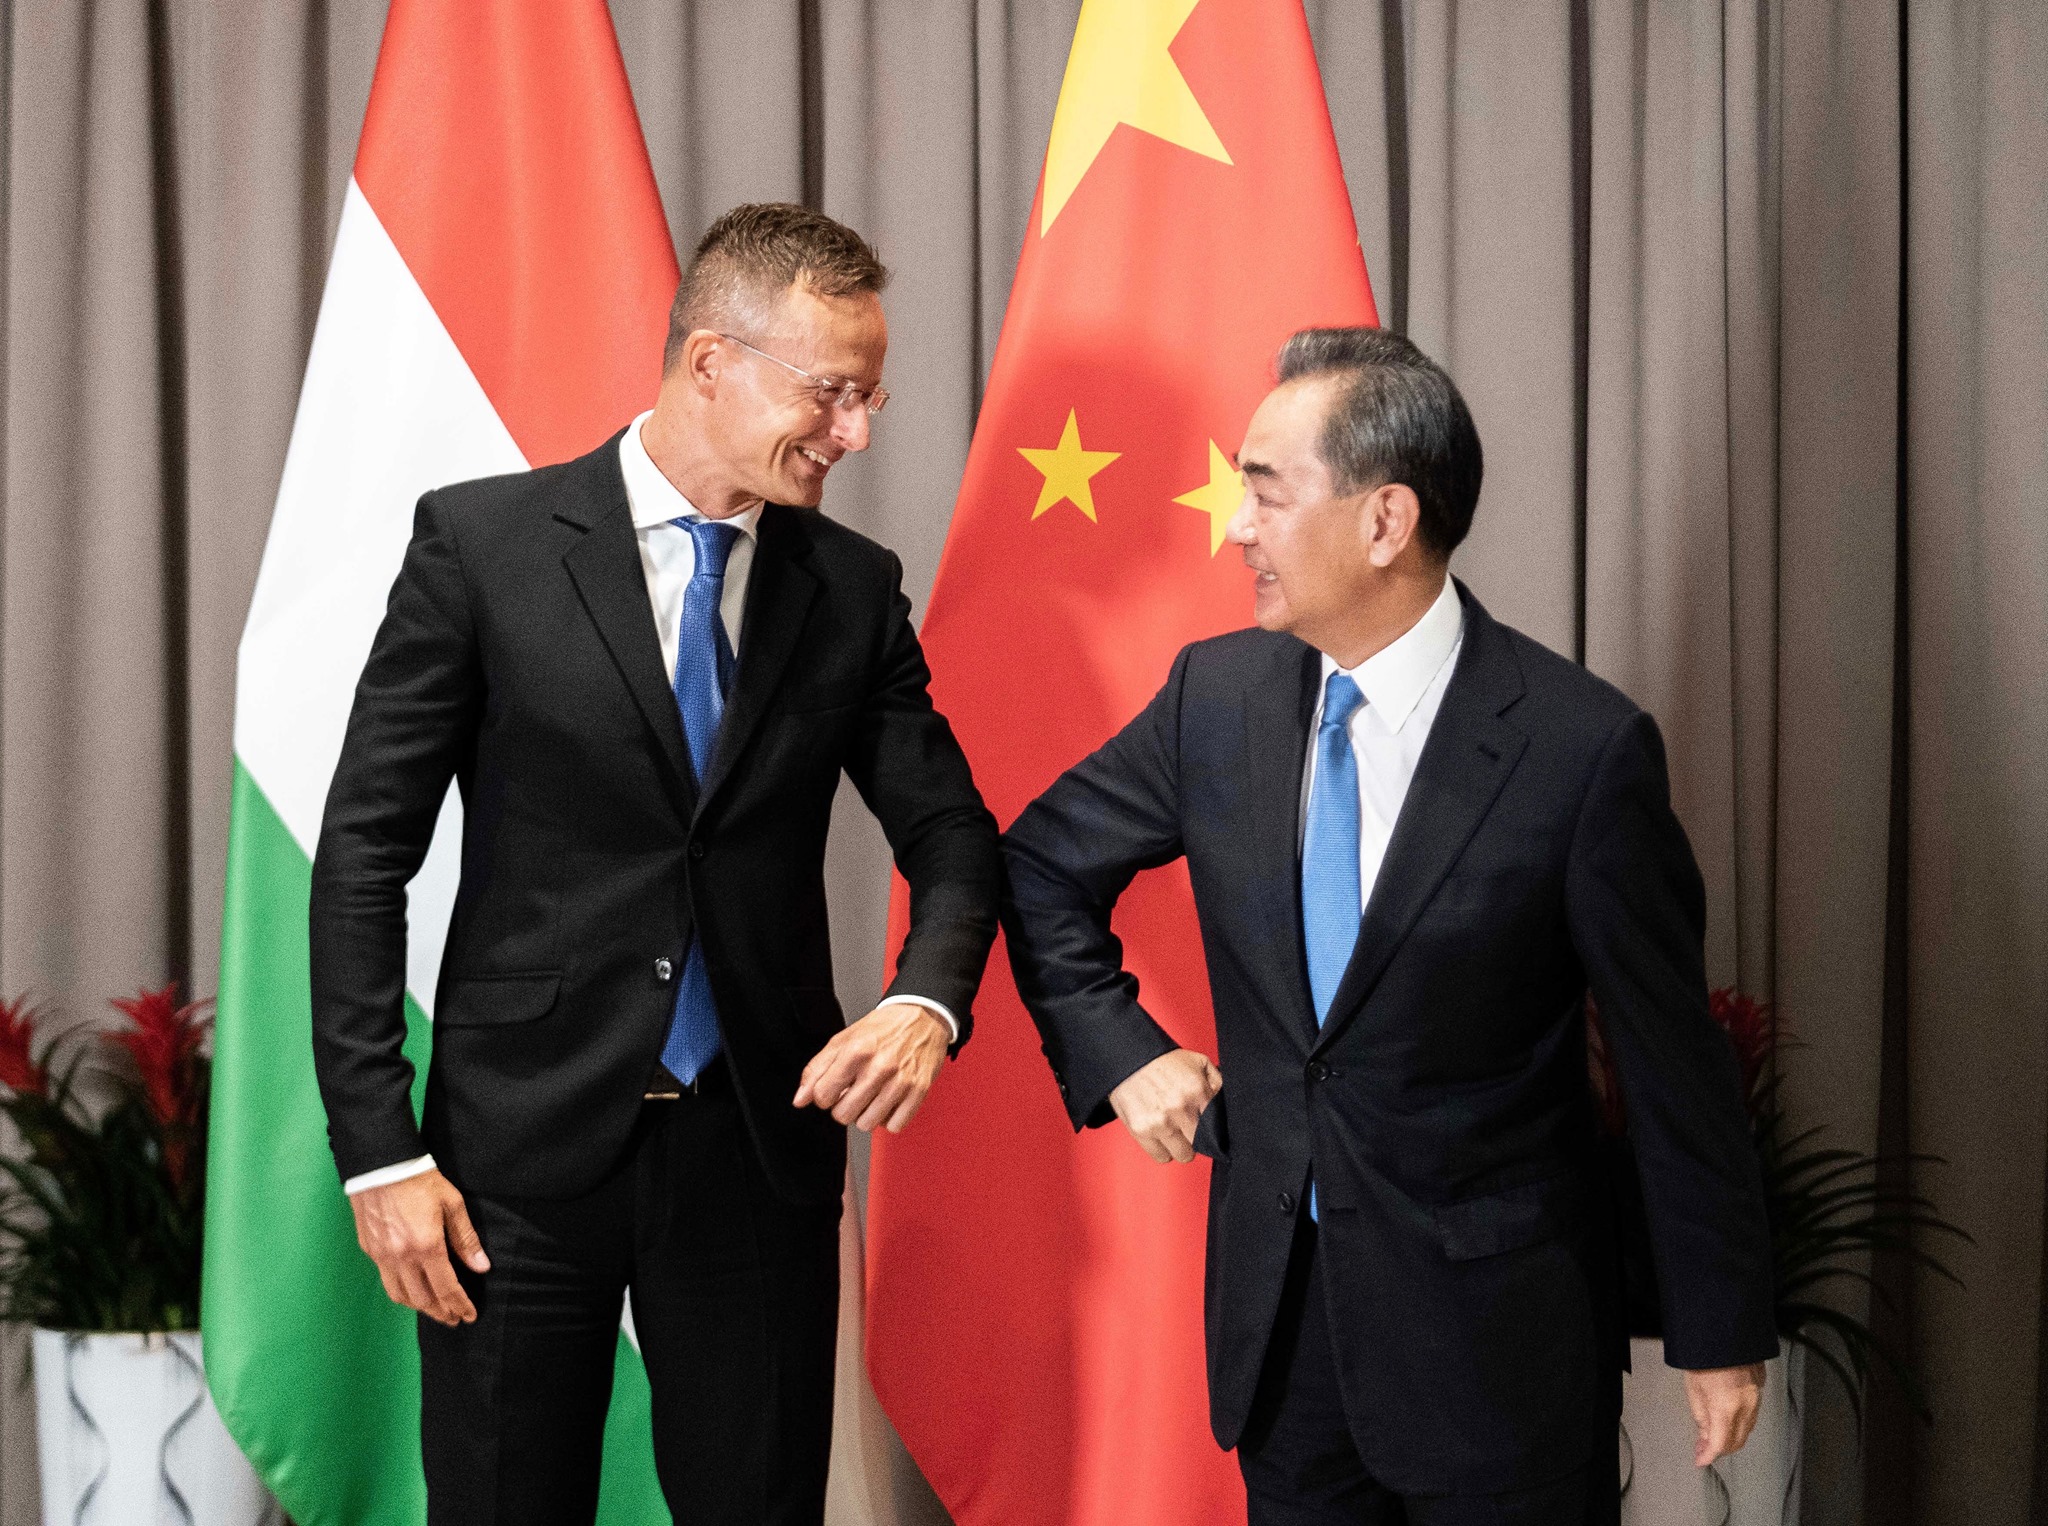 FM Szijjártó: China Can Play Key Role in Preventing Escalation of War